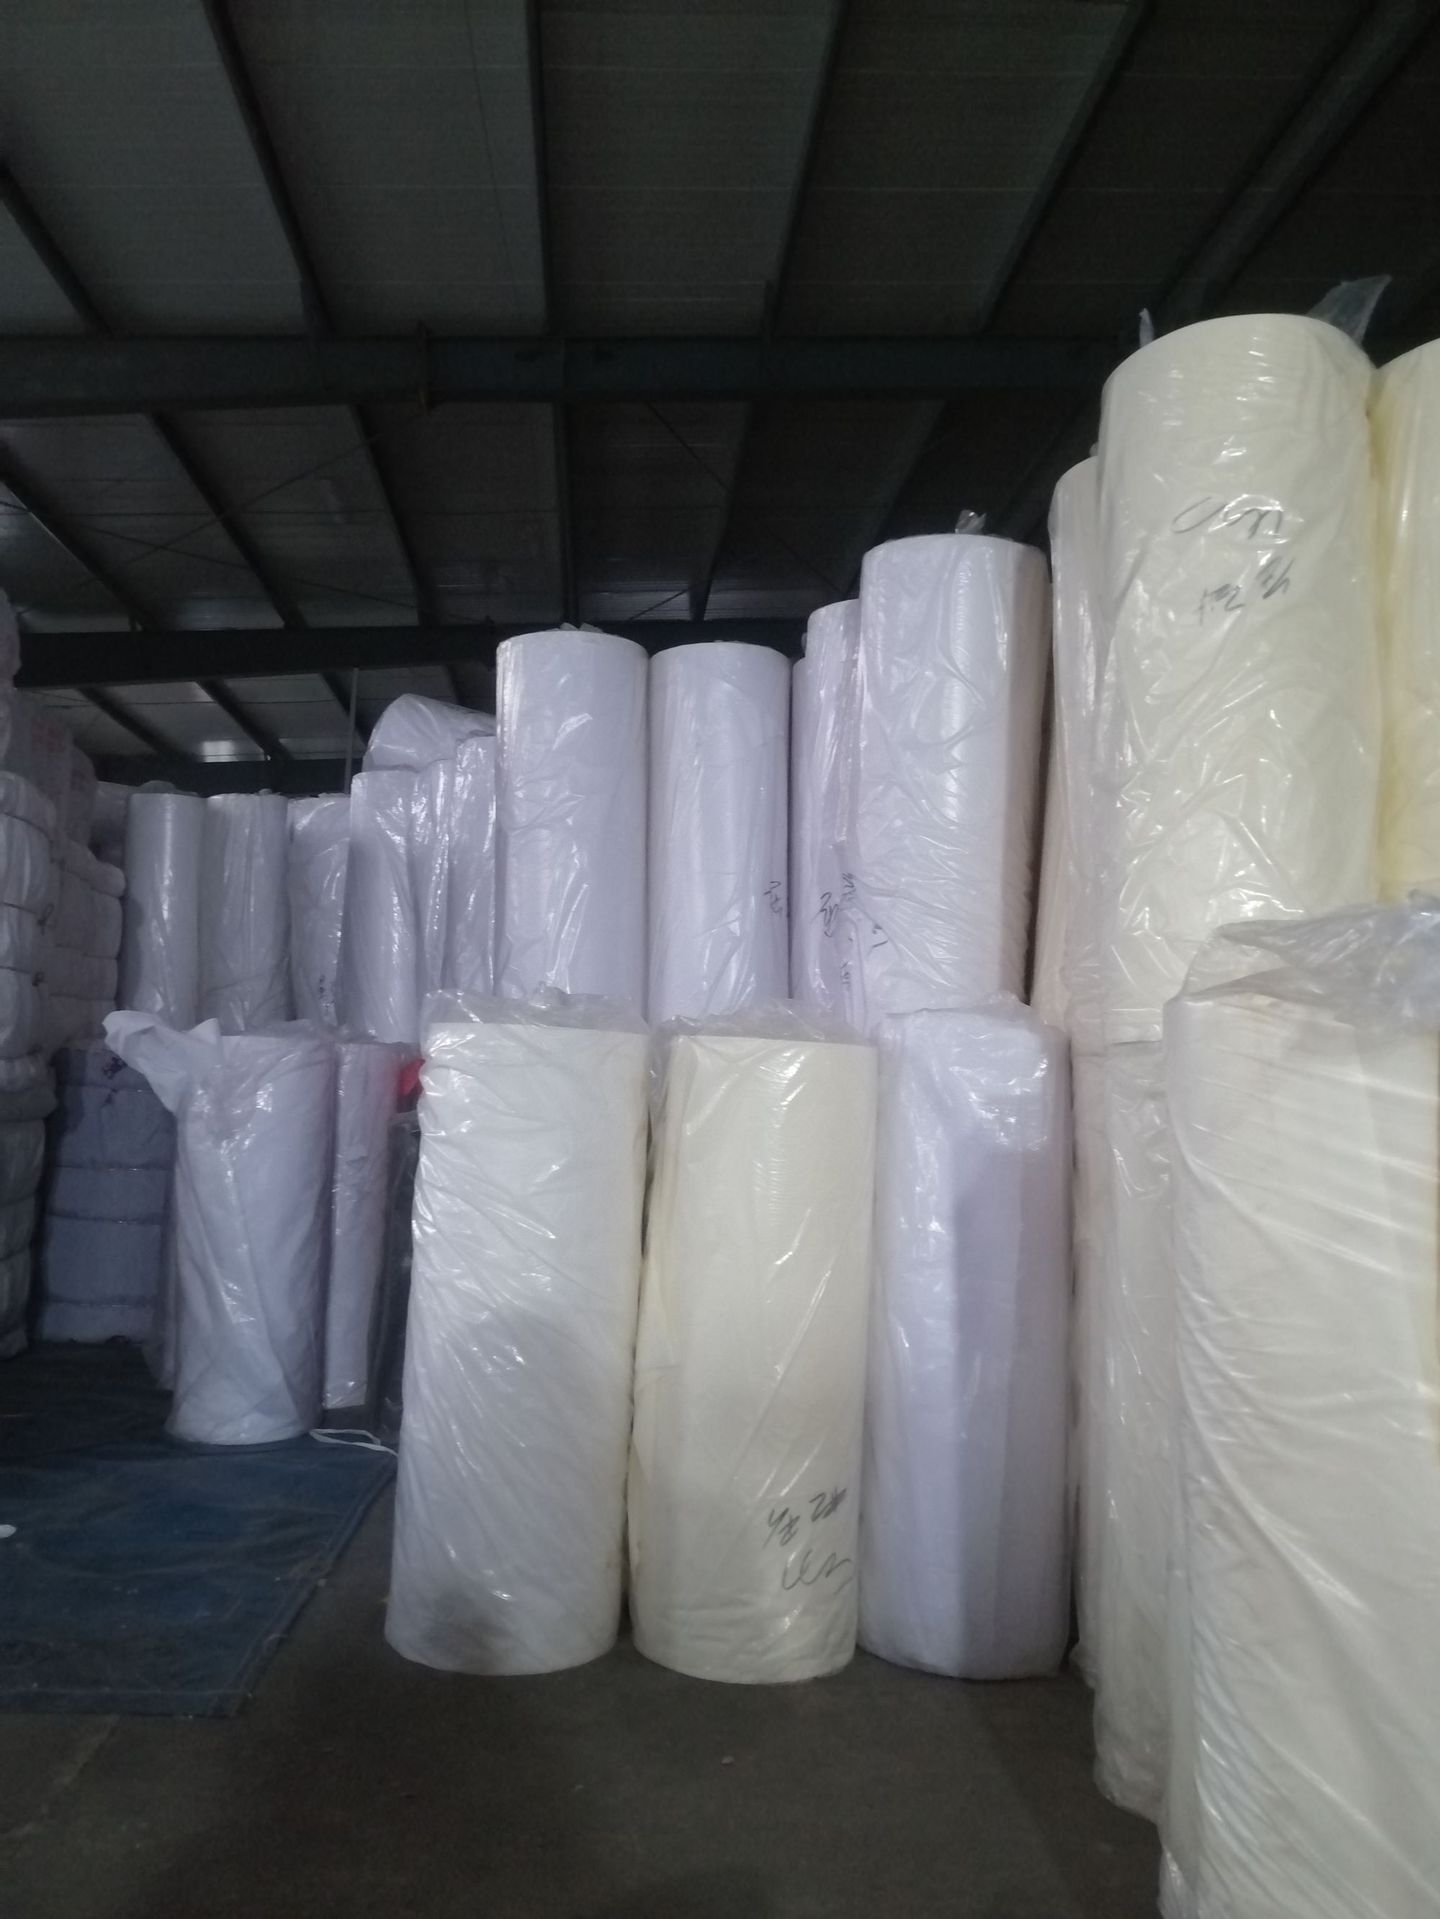 White Cloth Xiaobu Wholesale 100 M Rural Funeral-Handling White Cloth Mourning Apparel Fabric Chemical Fiber Brushed White Sheeting